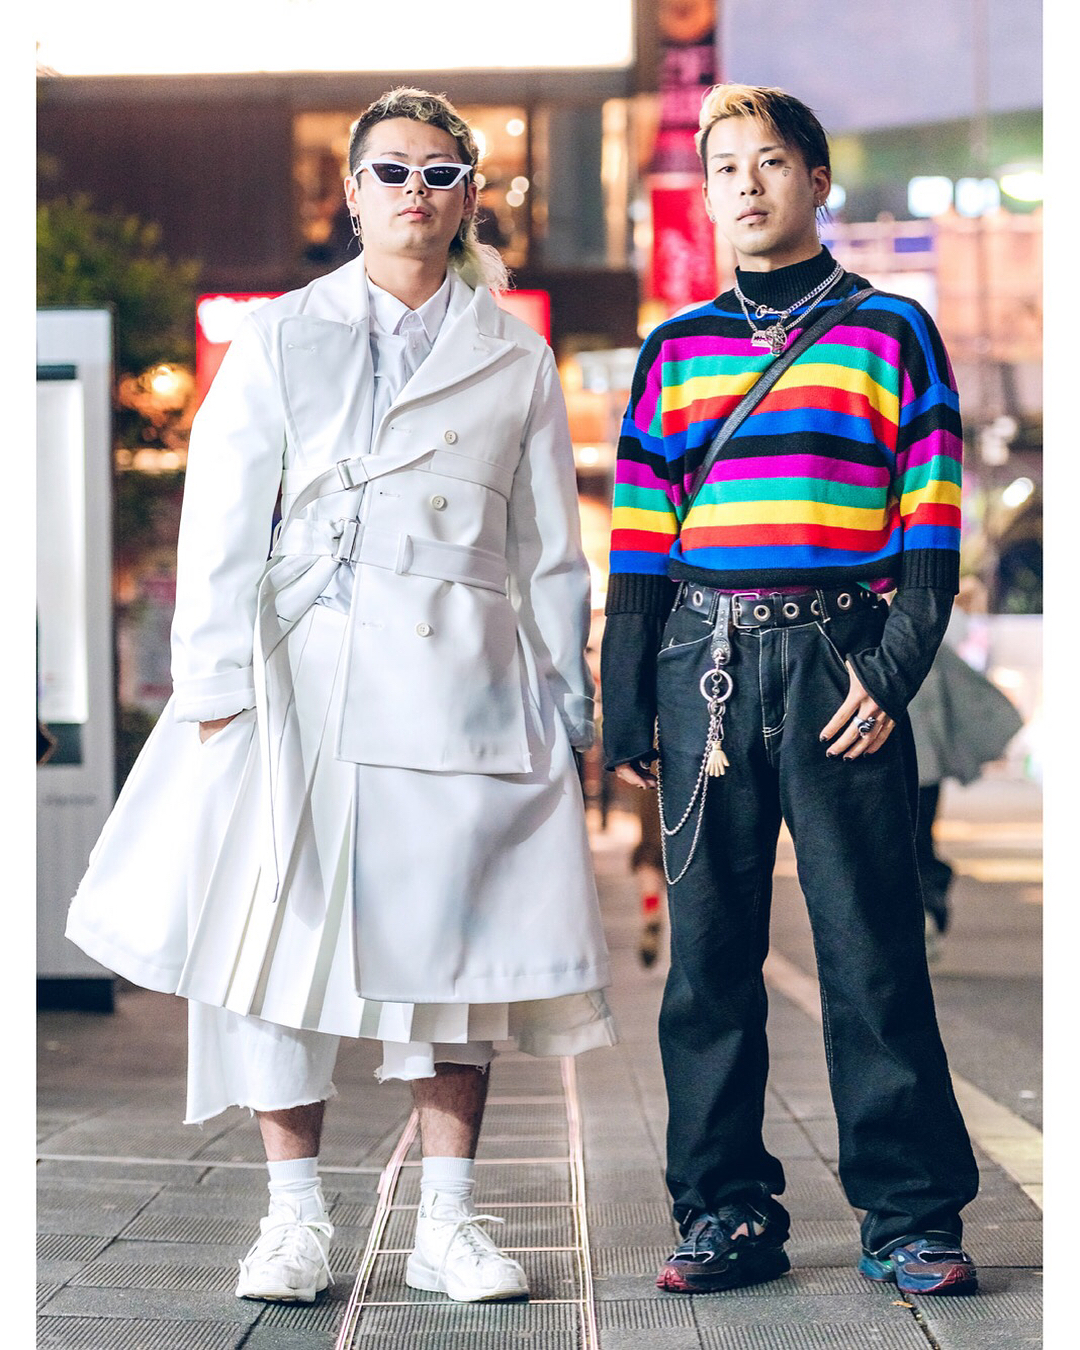 @Tokyo Fashion: Tokyo Fashion Week street style we've been shooting for ...